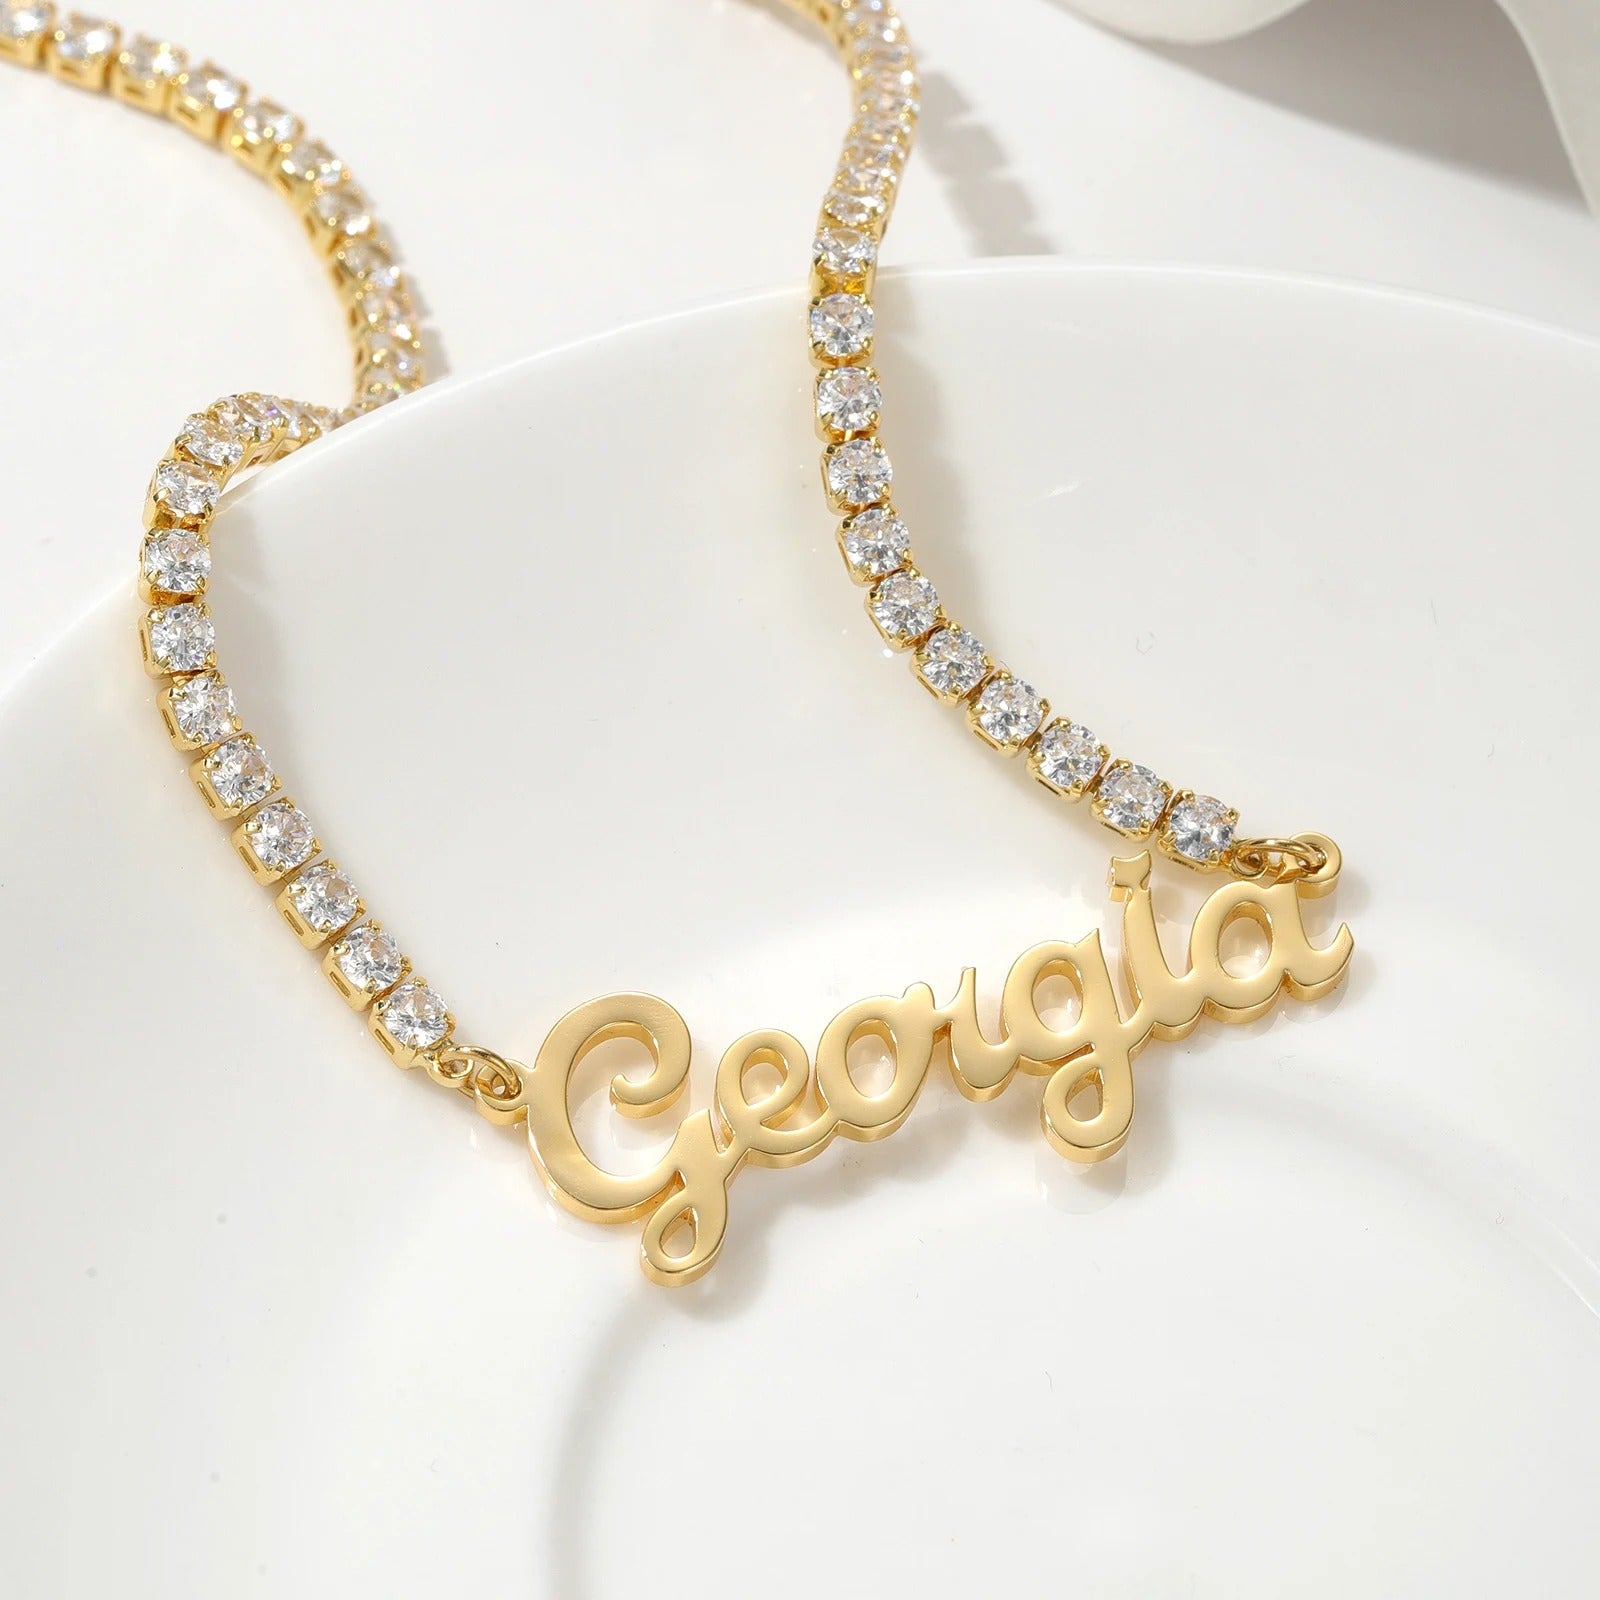 Personalized ICY Miami Tennis Necklace